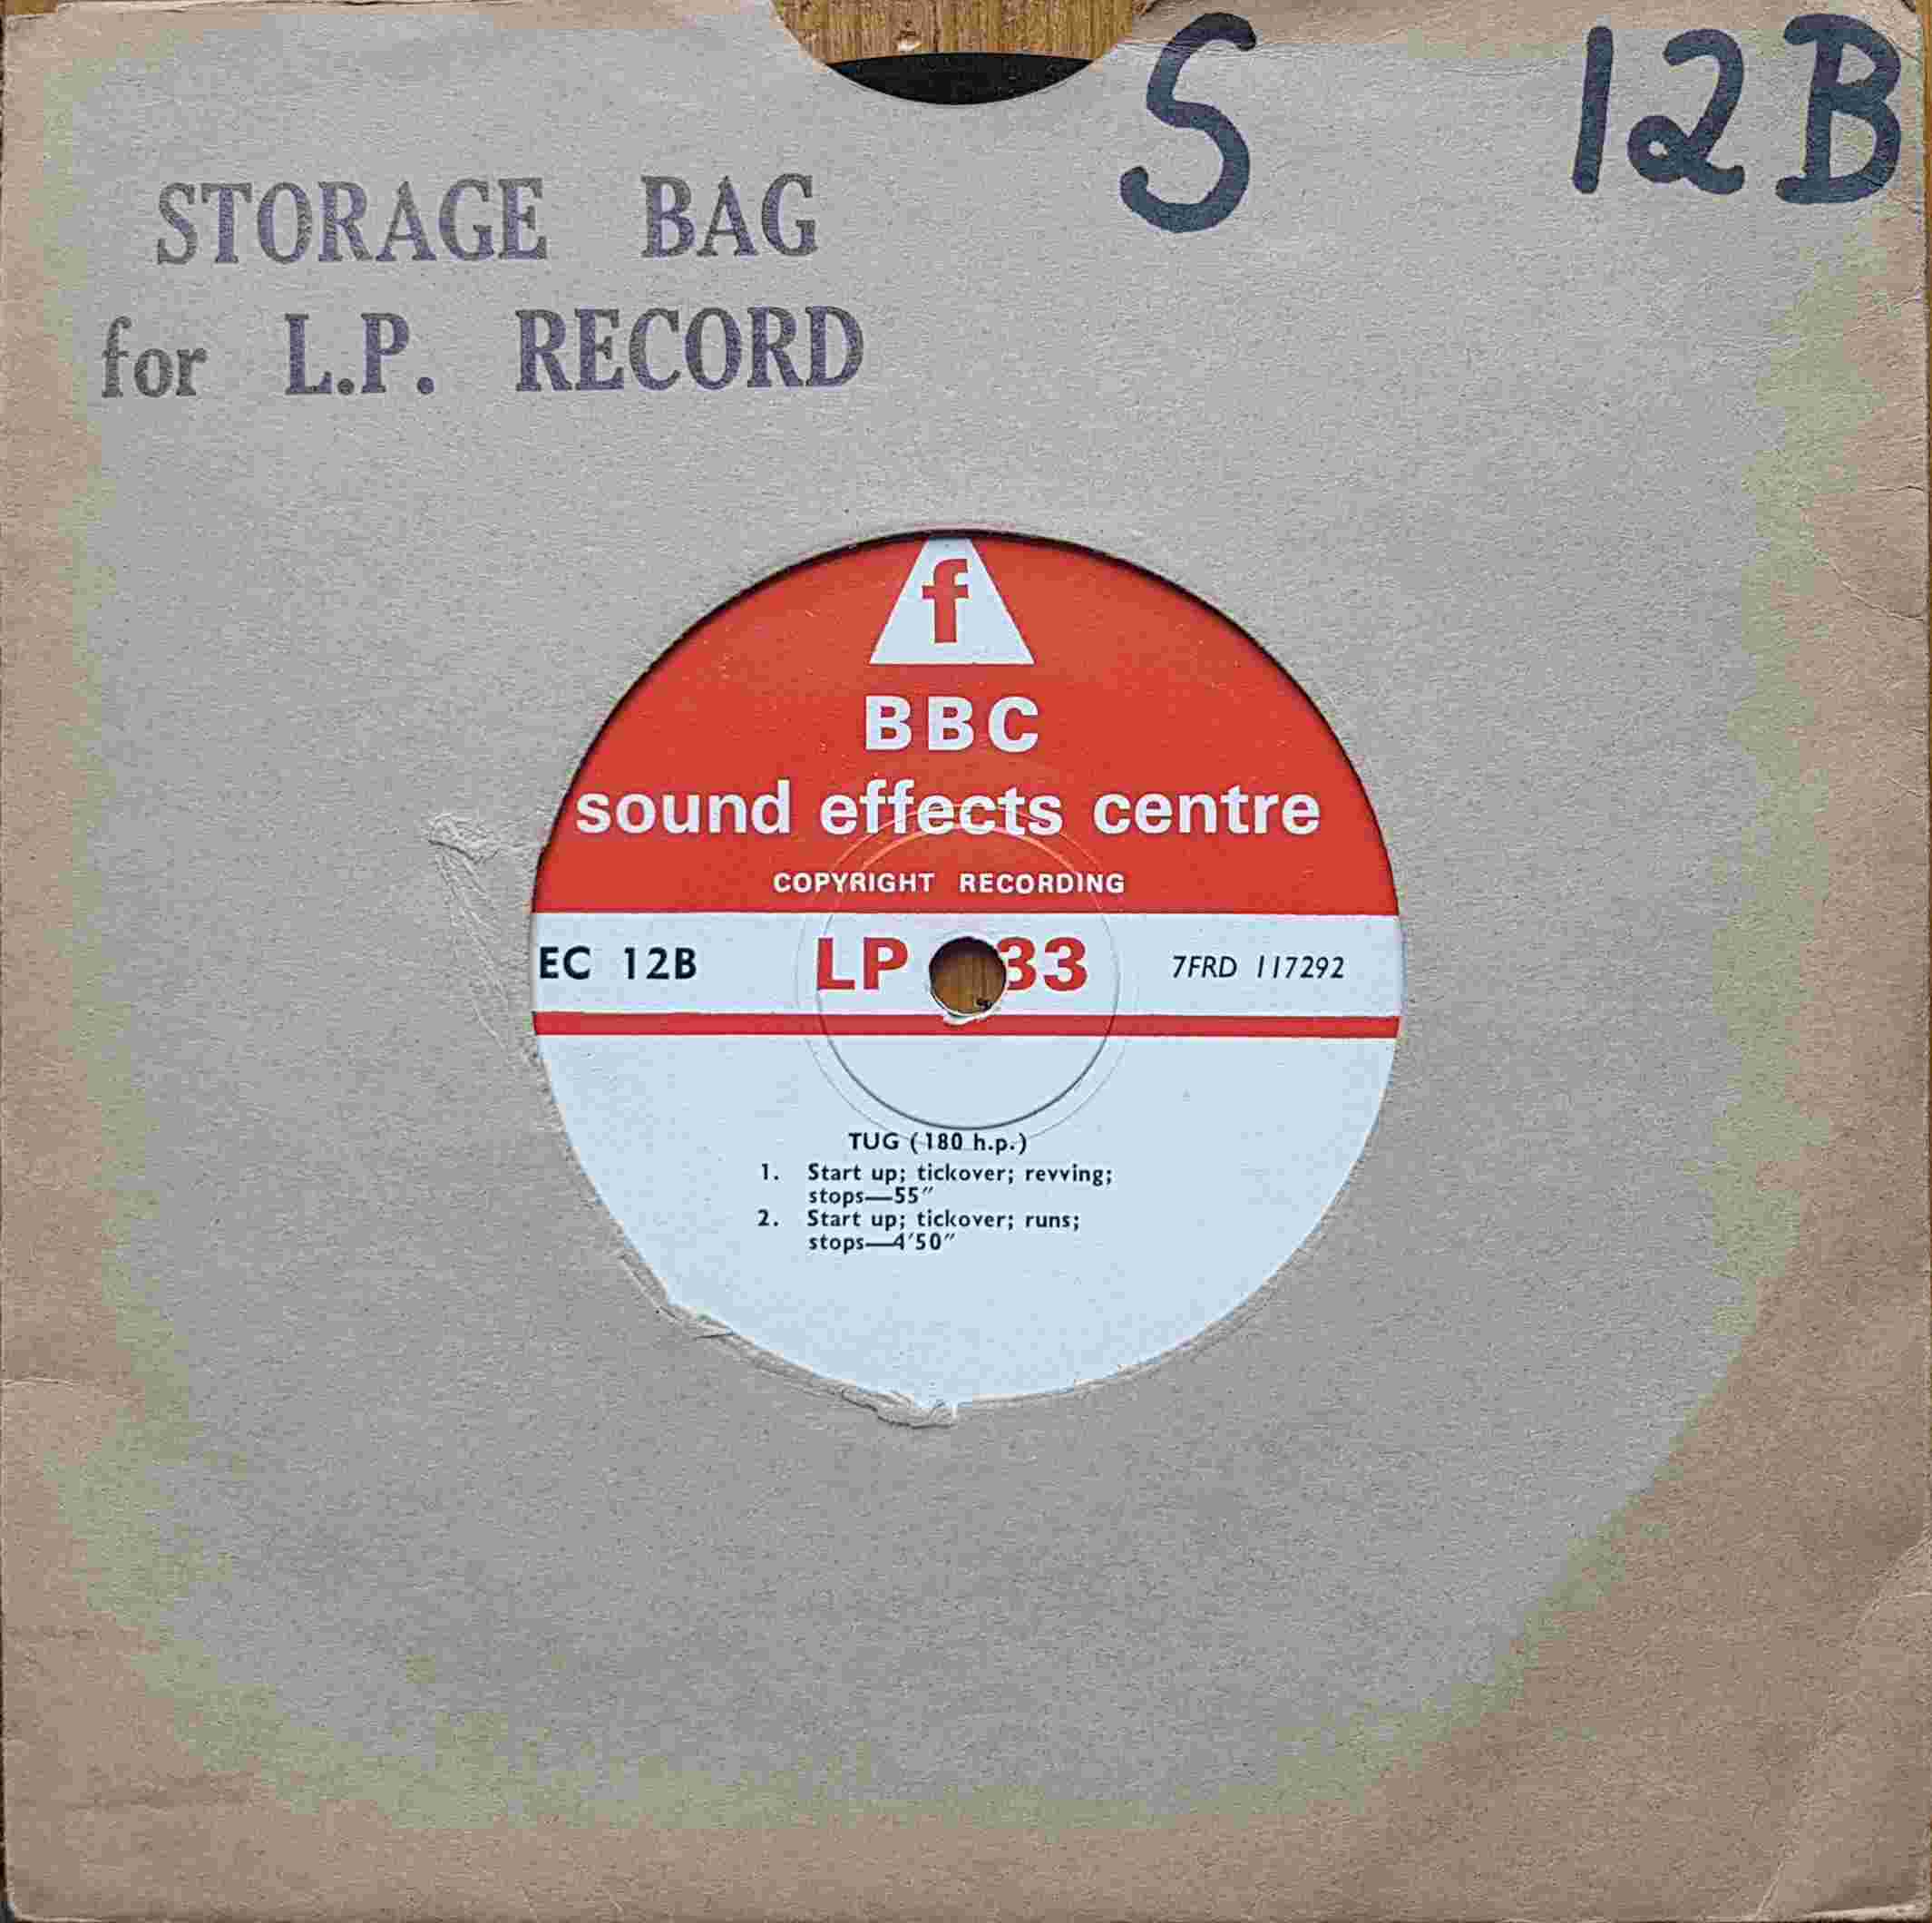 Picture of EC 12B Tug (180 H. P.) by artist Not registered from the BBC singles - Records and Tapes library